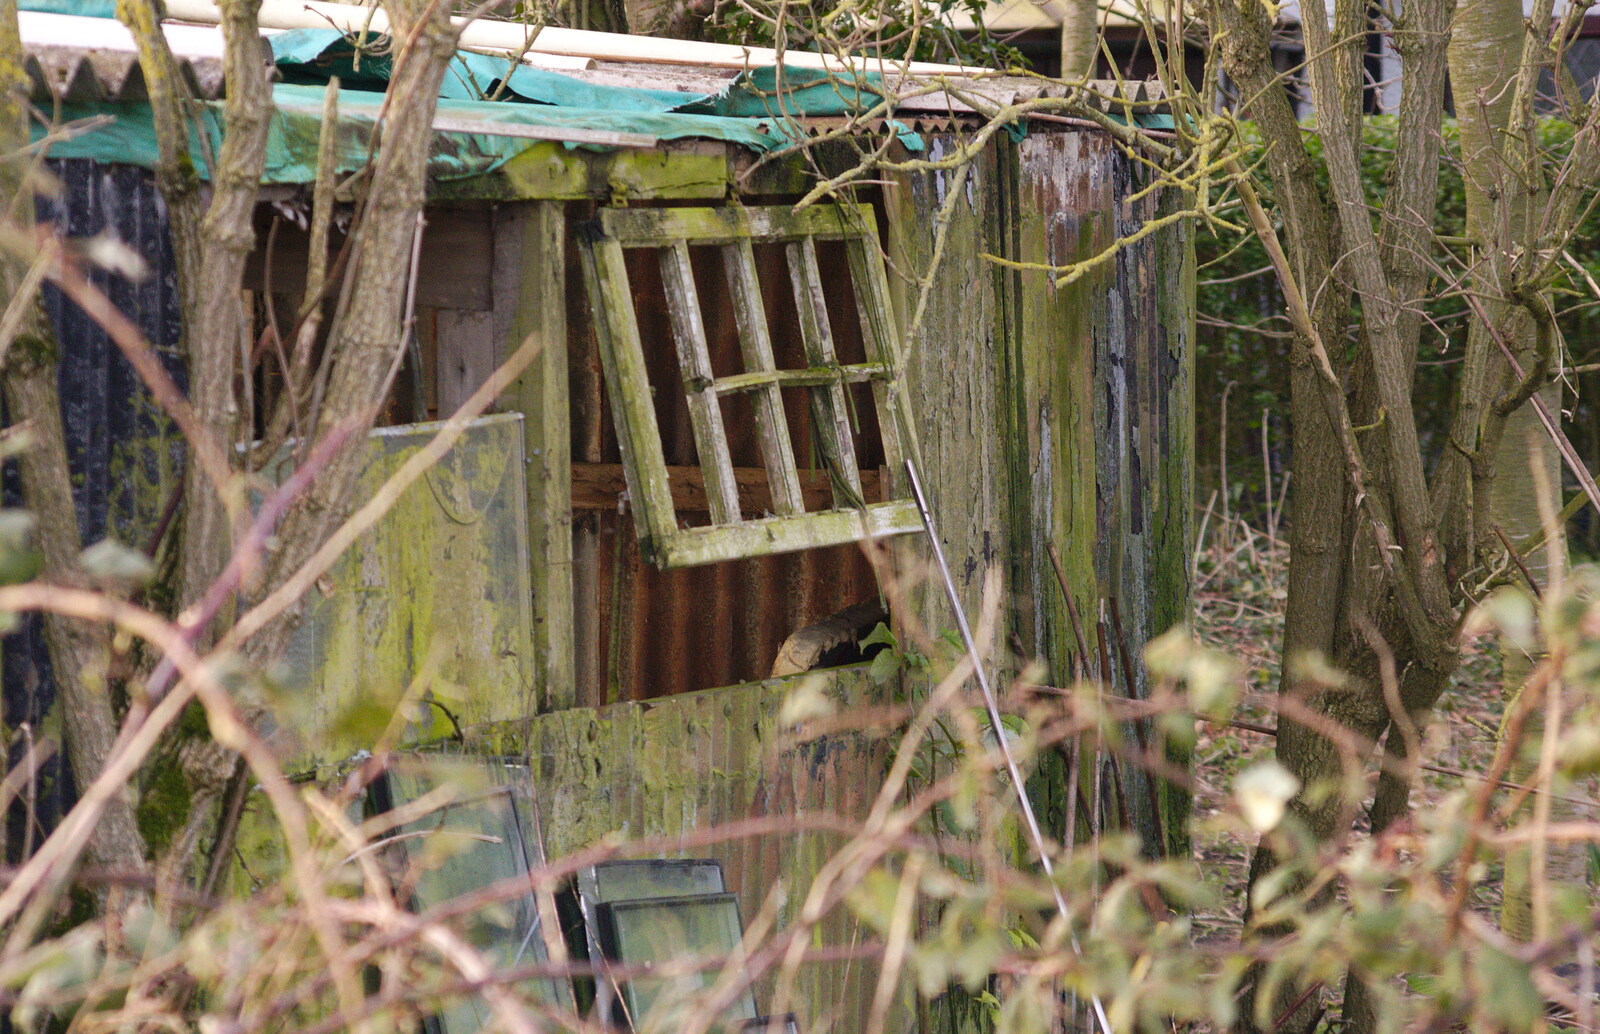 The back of Syd's old sheds from A Trip to see Chinner, Brome, Suffolk - 22nd April 2014